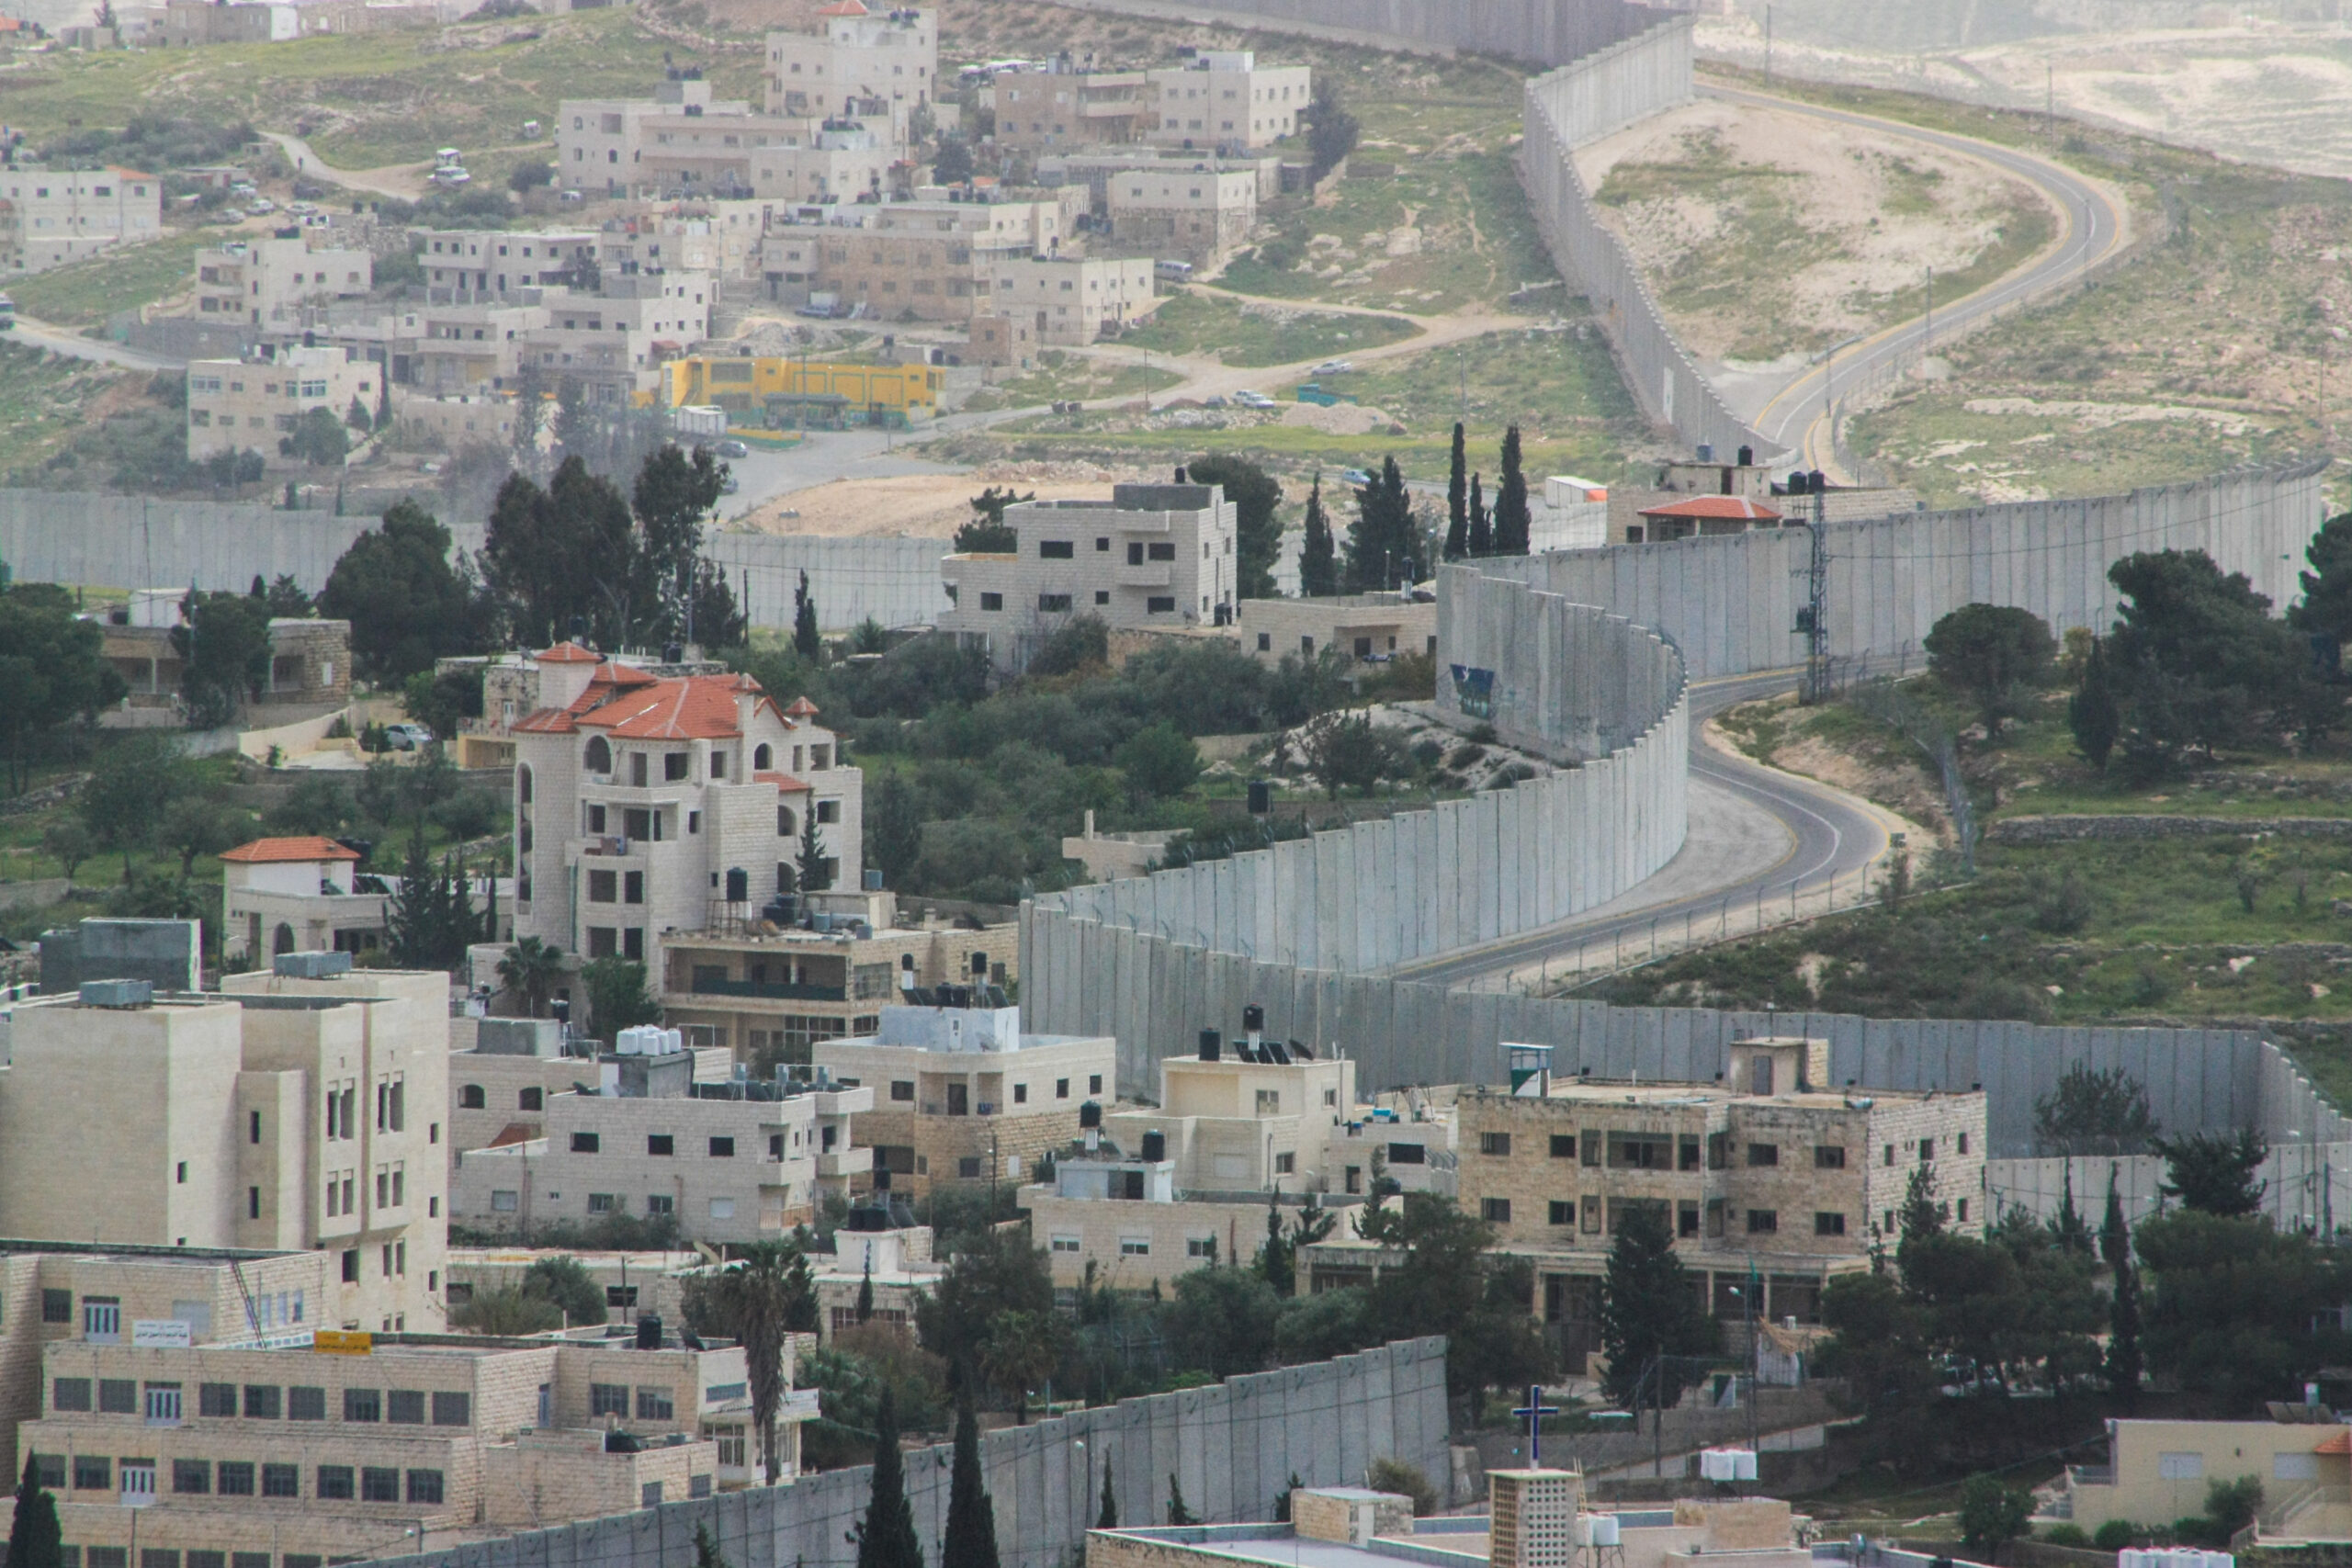 Separation Wall between the occupied palestinian territory’s and